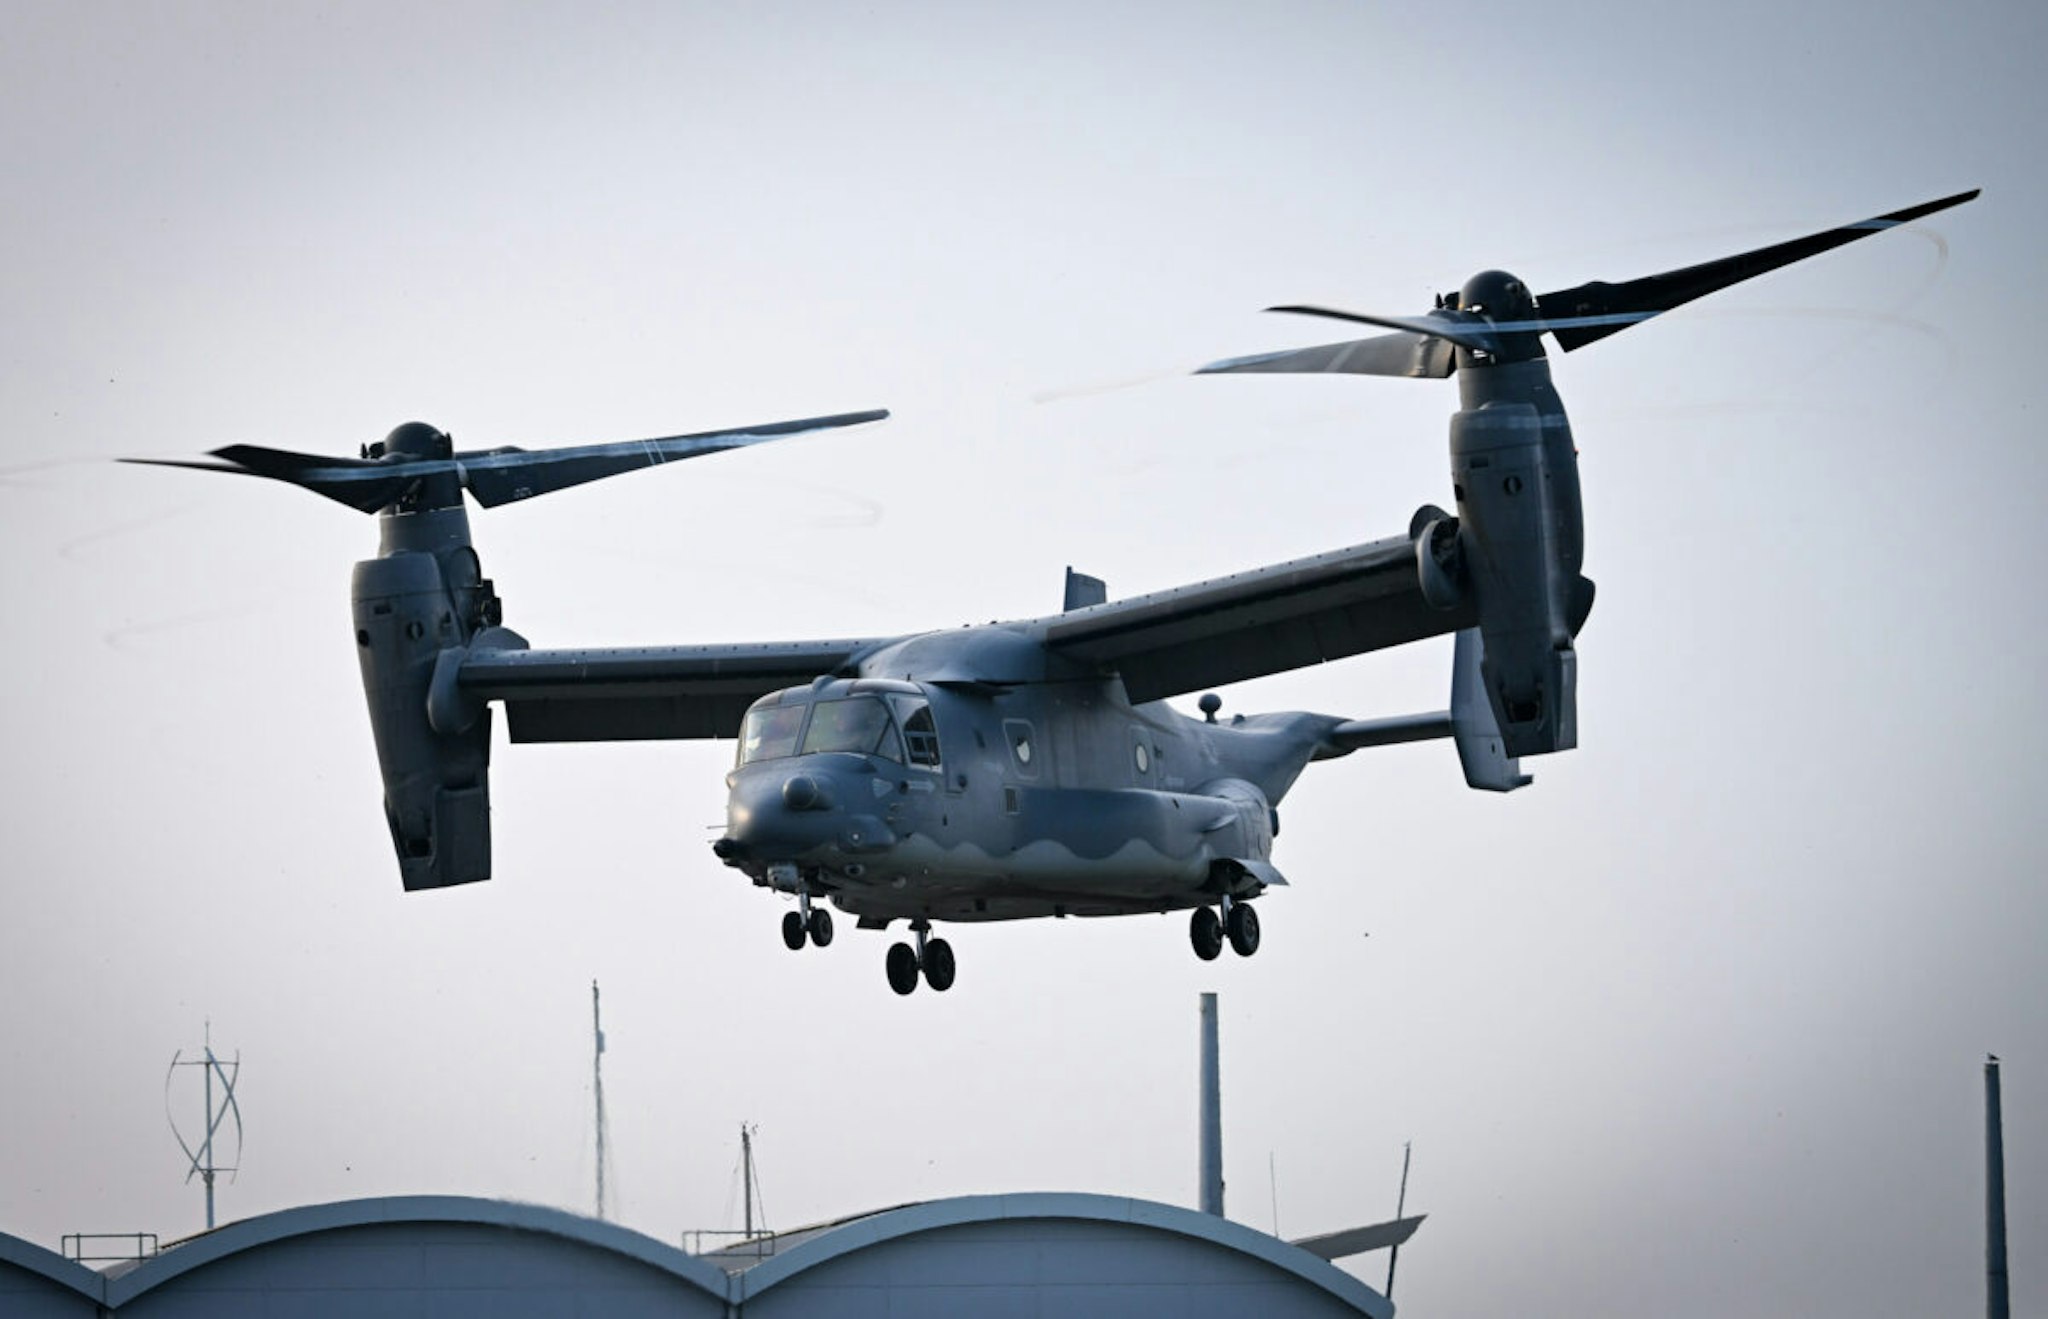 PORTLAND, ENGLAND - MARCH 30: A US Air Force (USAF) Bell-Boeing CV-22B Osprey tiltrotor military aircraft takes off at HeliOperations base, on March 30, 2022 in Portland, United Kingdom.